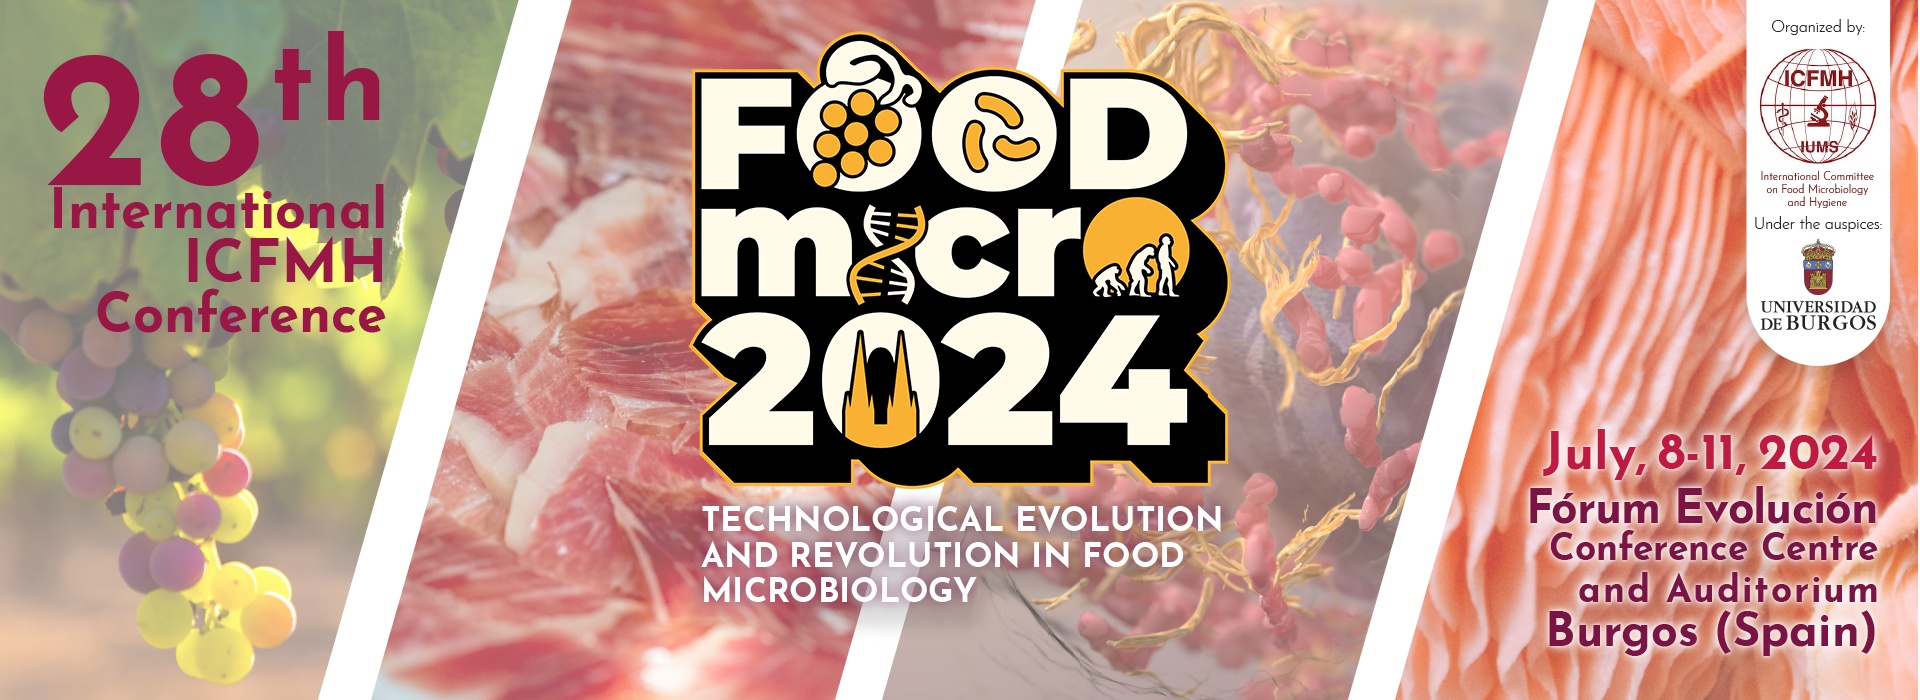 28th International Conference on Food Microbiology and Hygiene